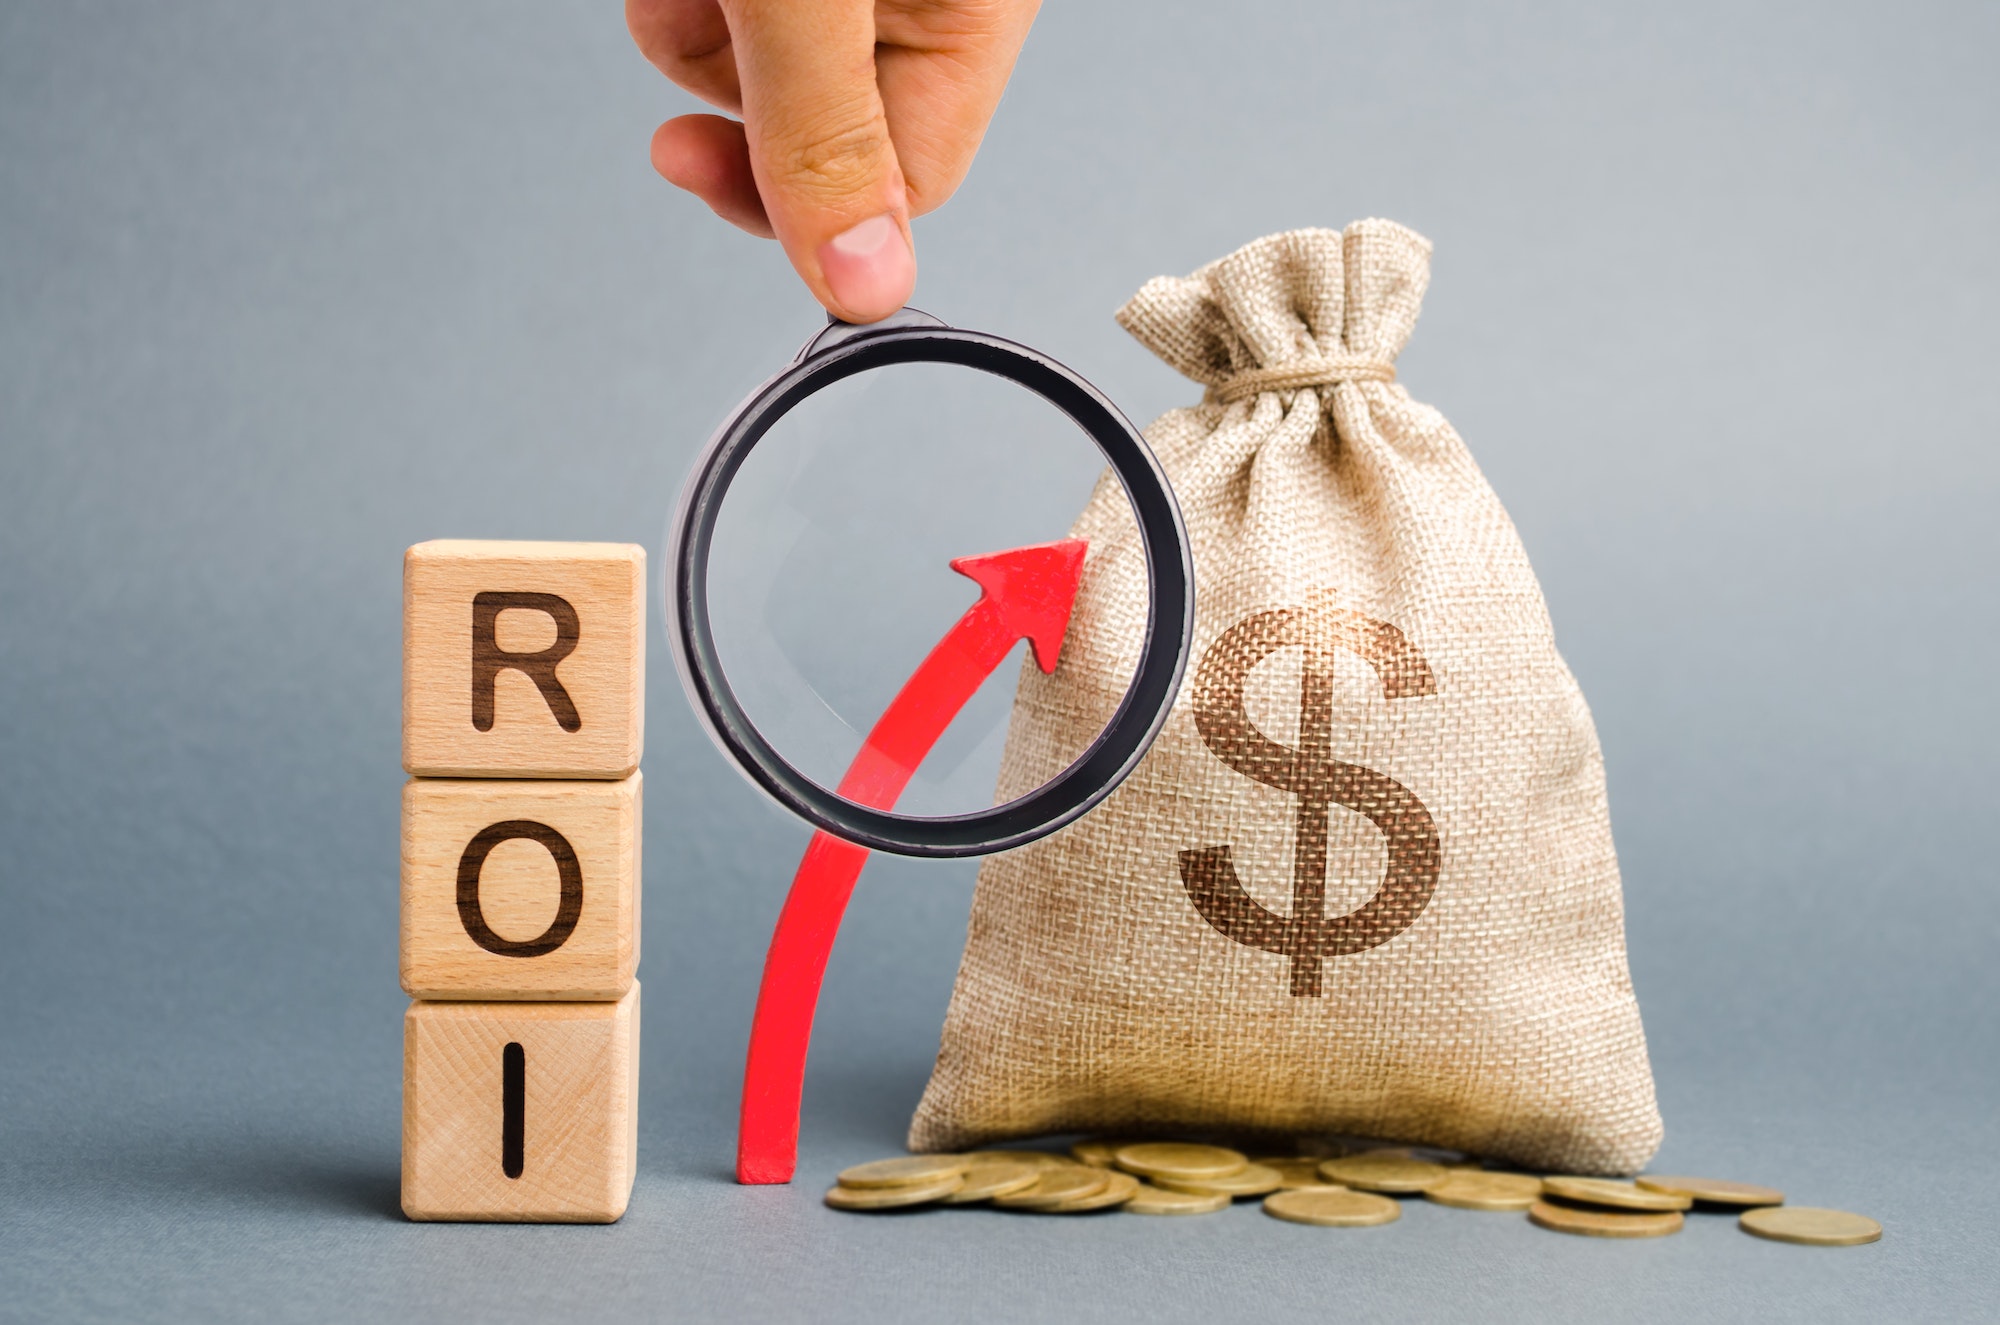 Wooden blocks with the word ROI and the up arrow with the money bag